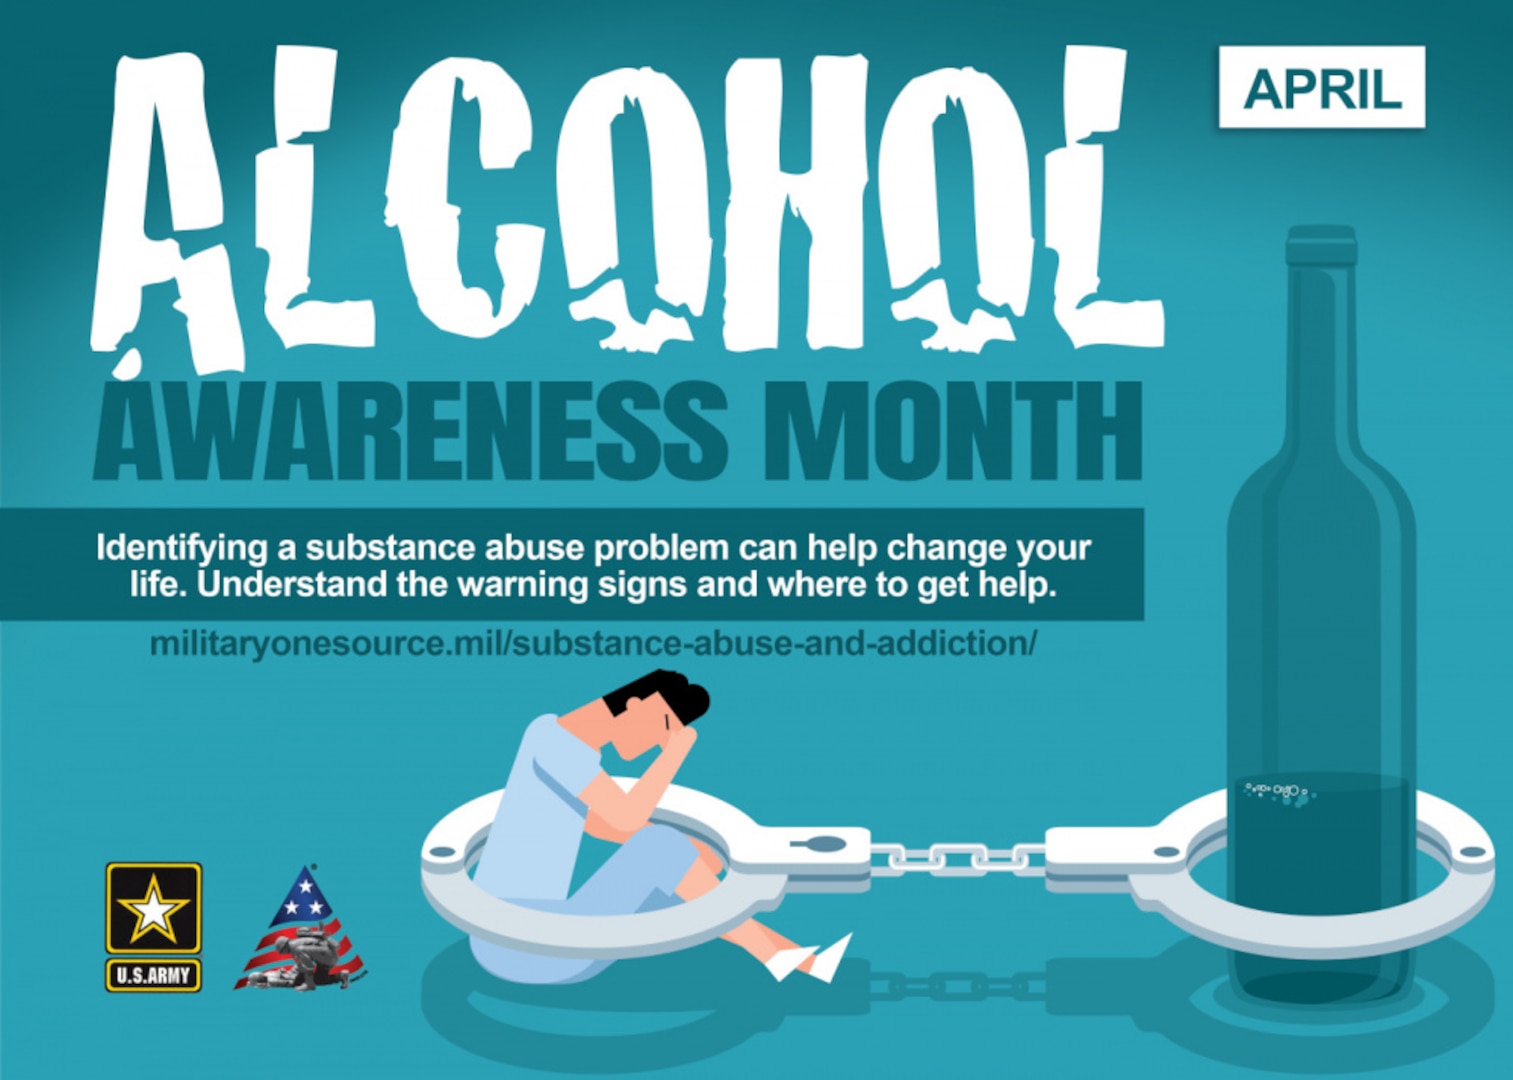 How To Help An Alcoholic Get Help